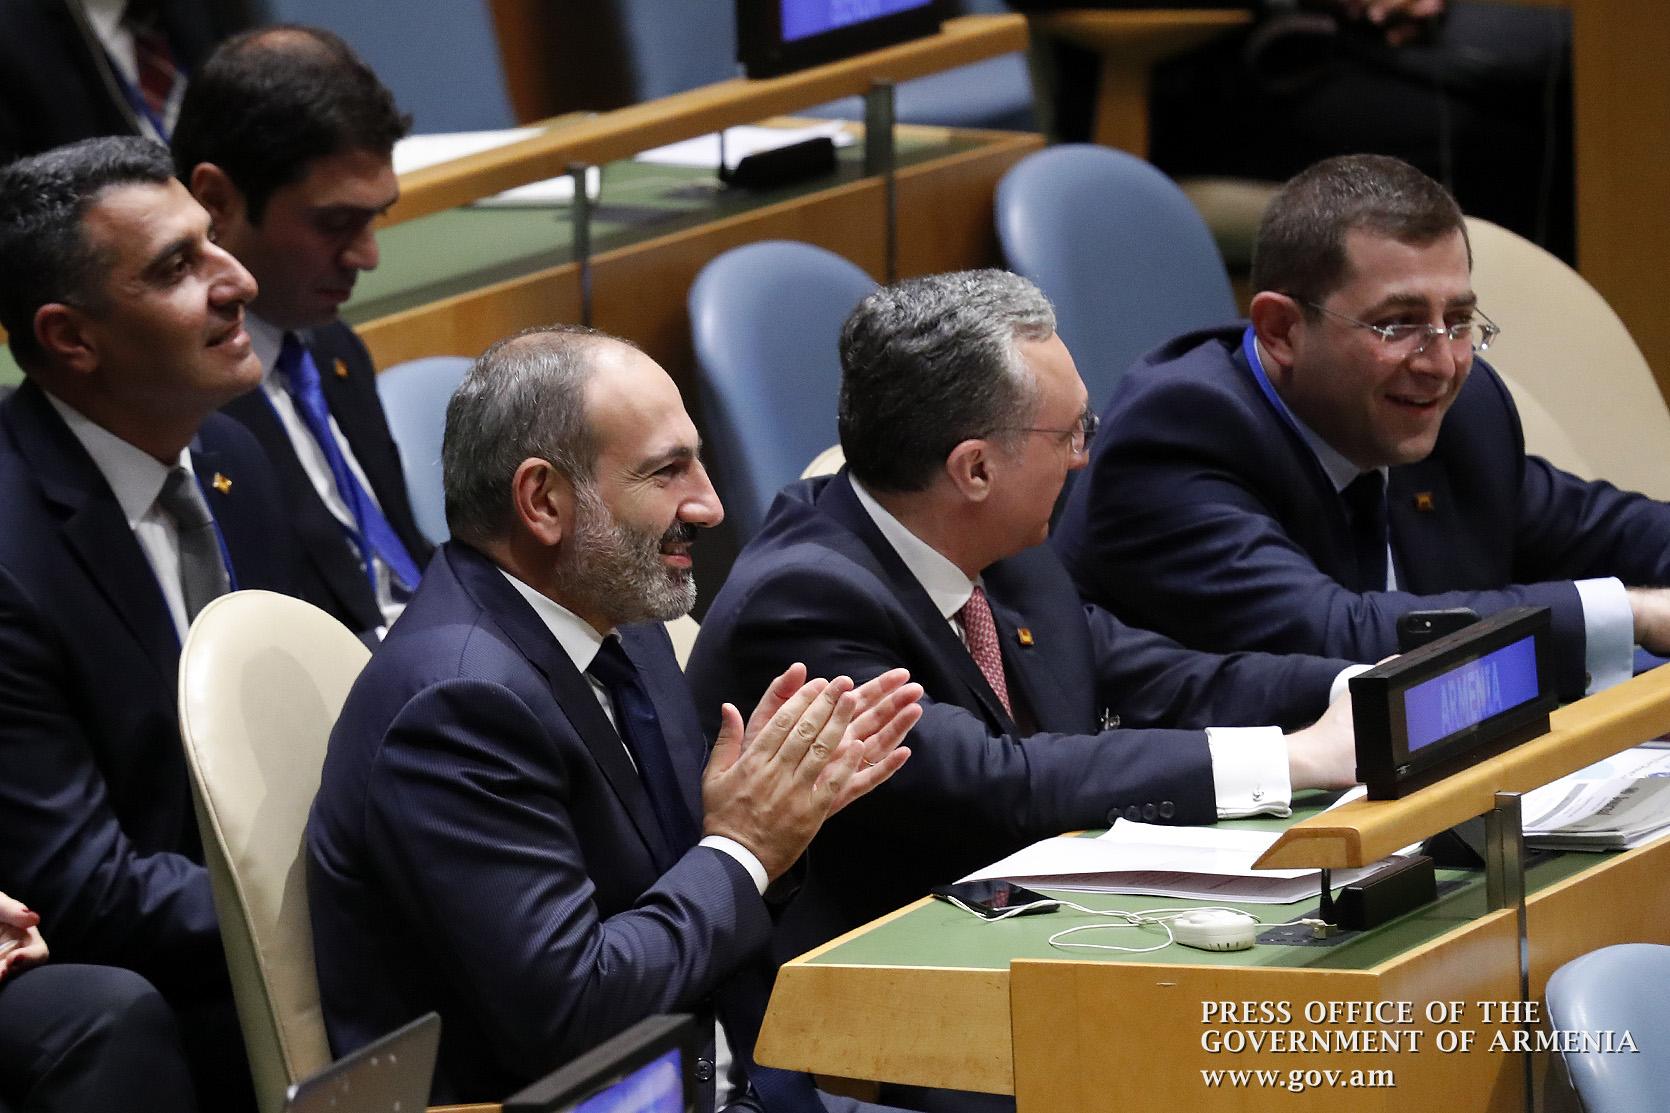 Revolution at Home, Continuity Abroad: Pashinyan in UN Debut